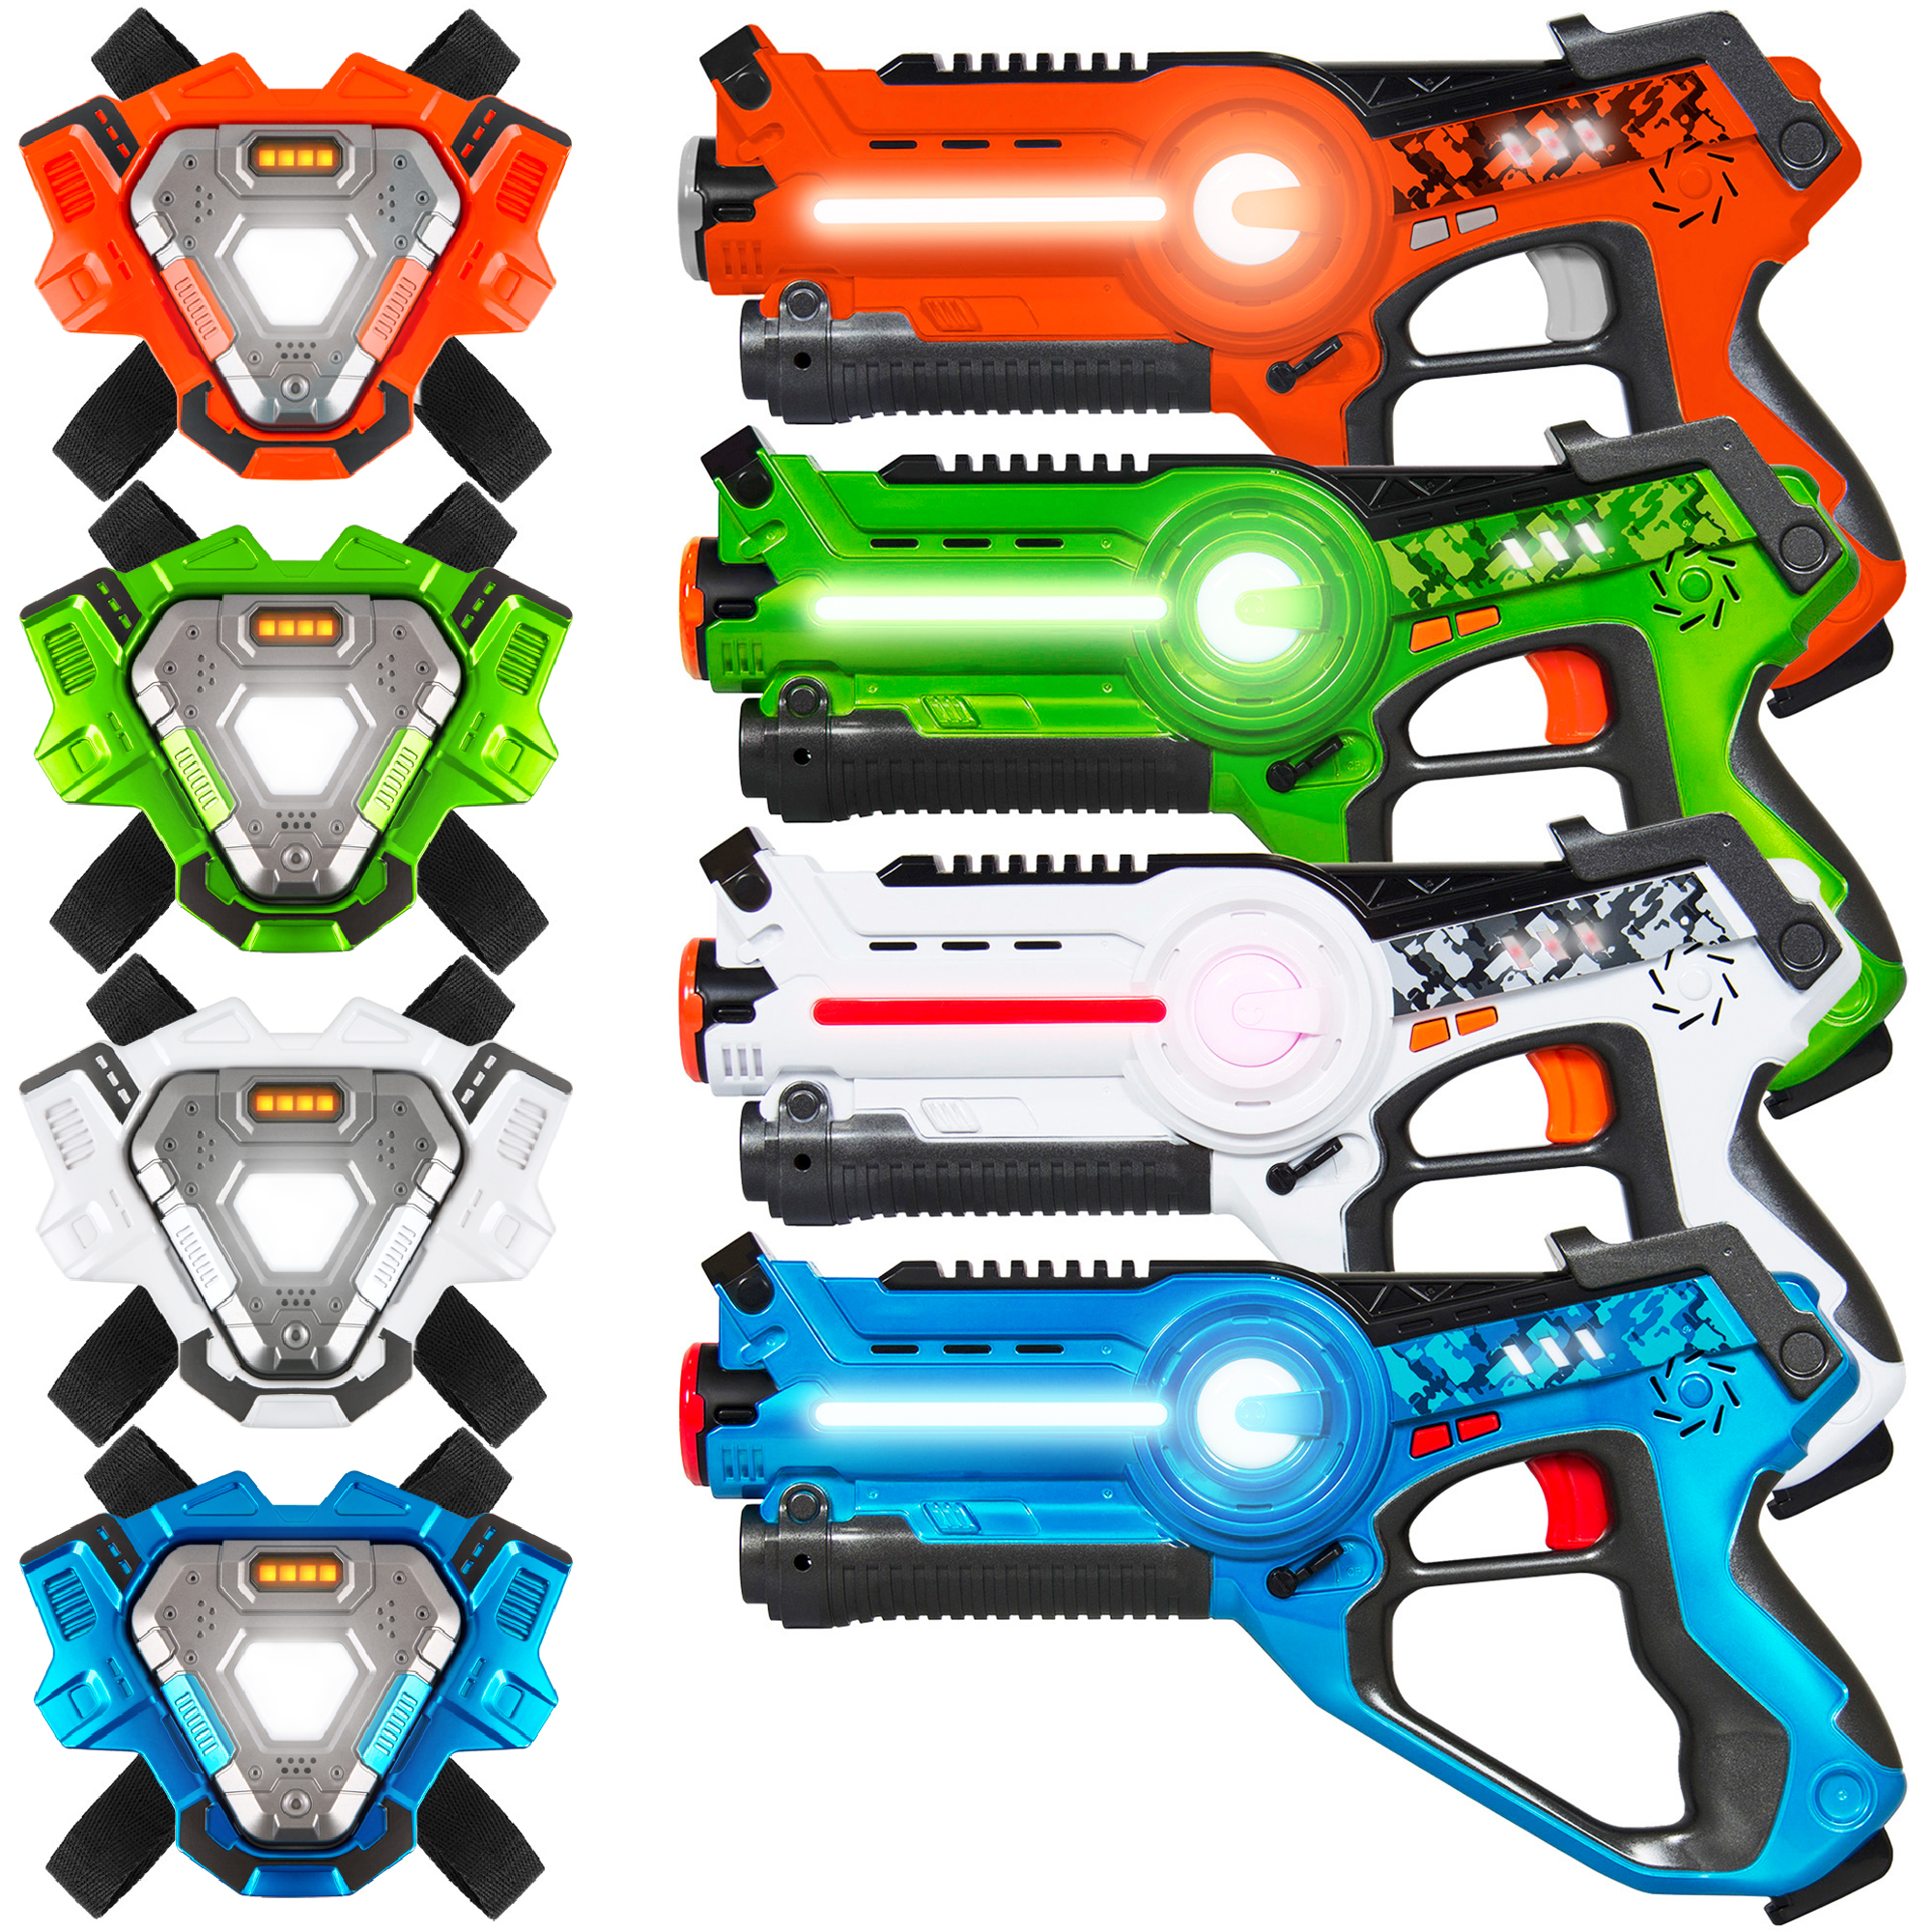 Best Choice Products Set of 4 Infrared Laser Tag Guns & Vest Set for Kids & Adults - Orange/Green/White/Blue - image 1 of 6